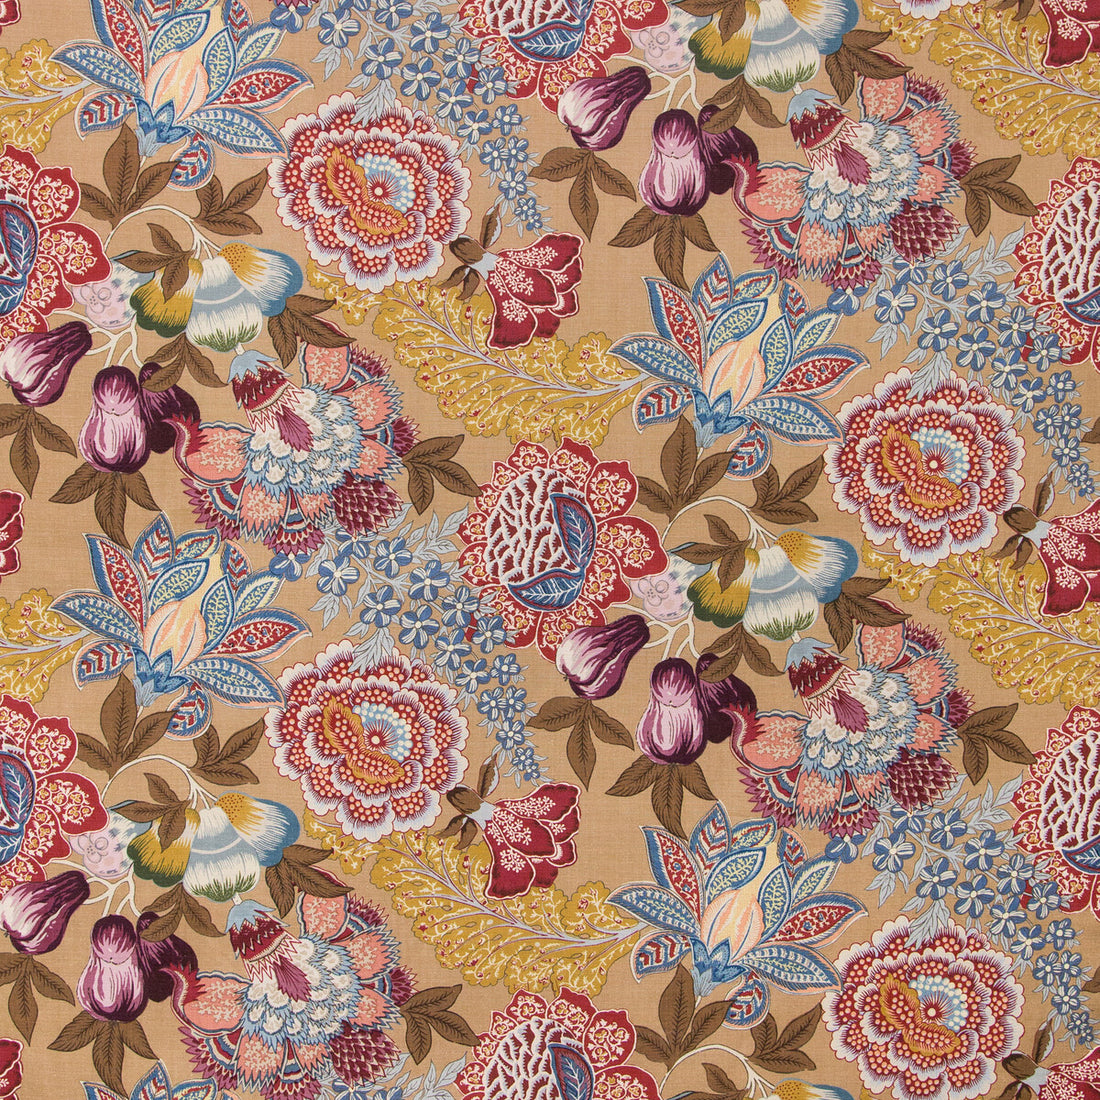 Karabali Print fabric in wheat color - pattern 8020101.1659.0 - by Brunschwig &amp; Fils in the Grand Bazaar collection